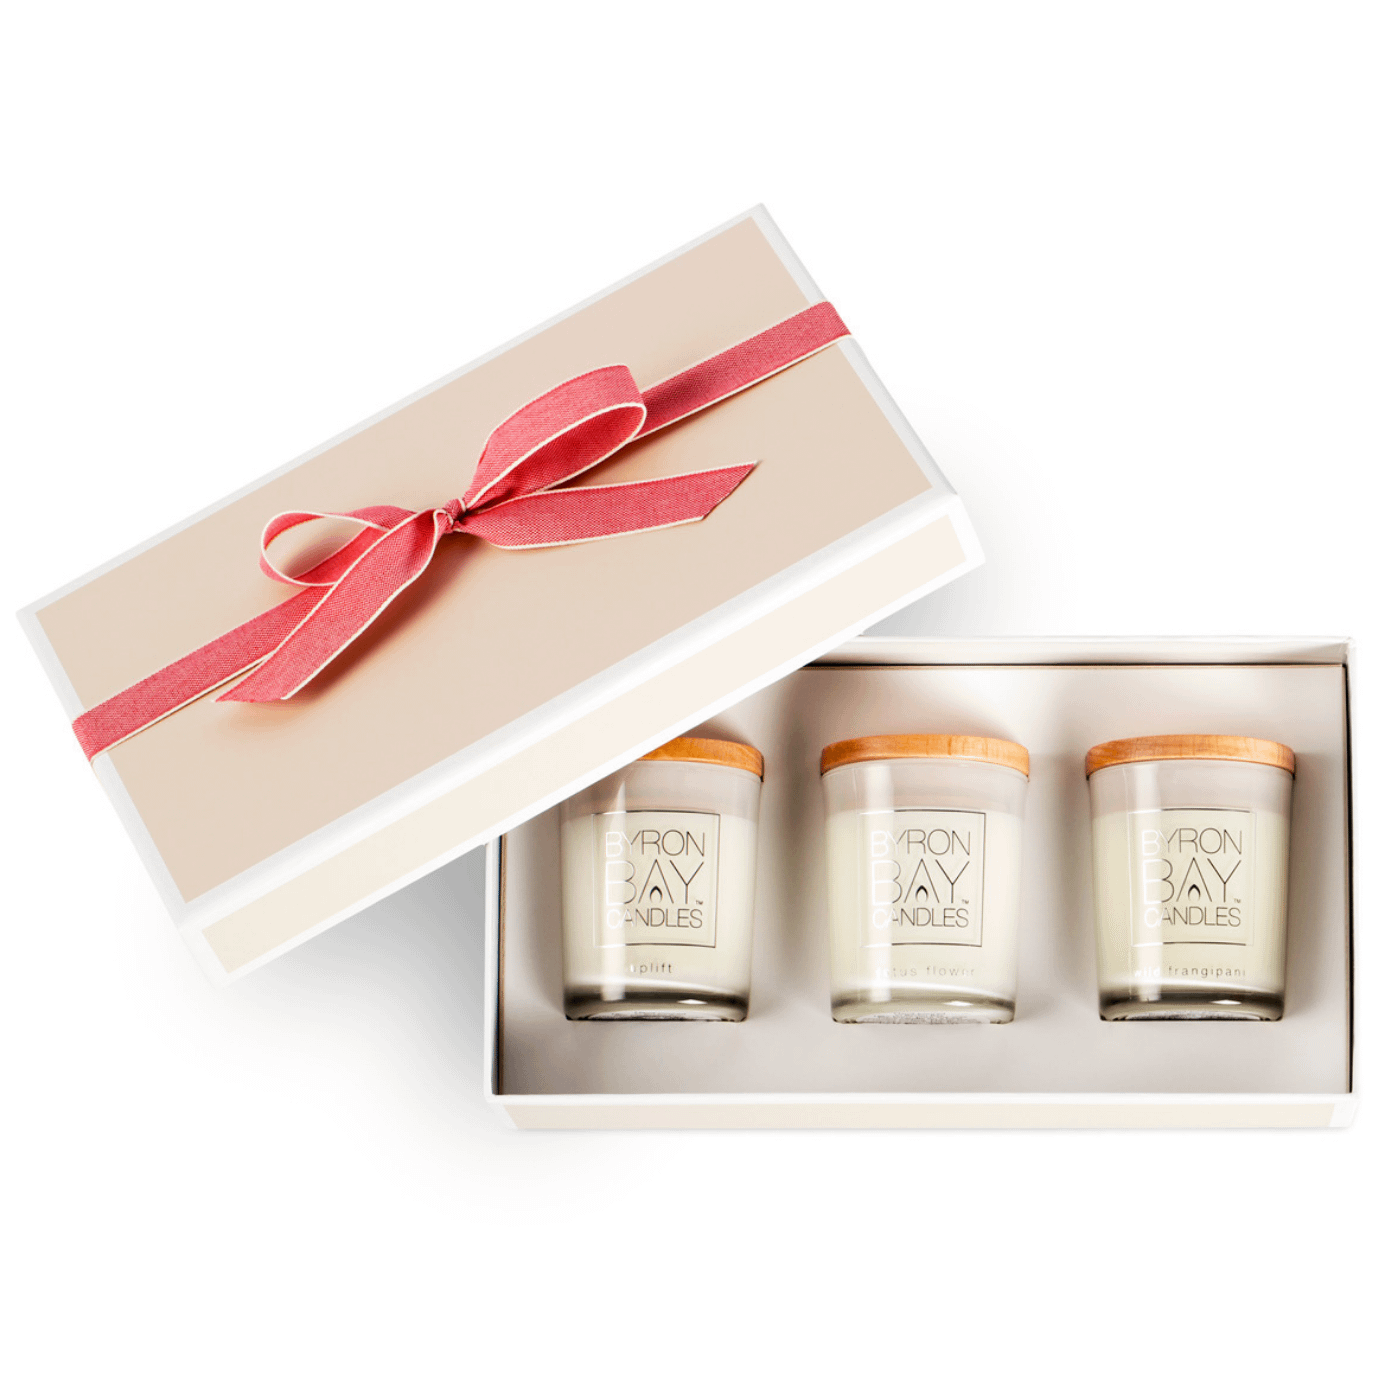 Triple Gift Set with 3 x 18 hour candles